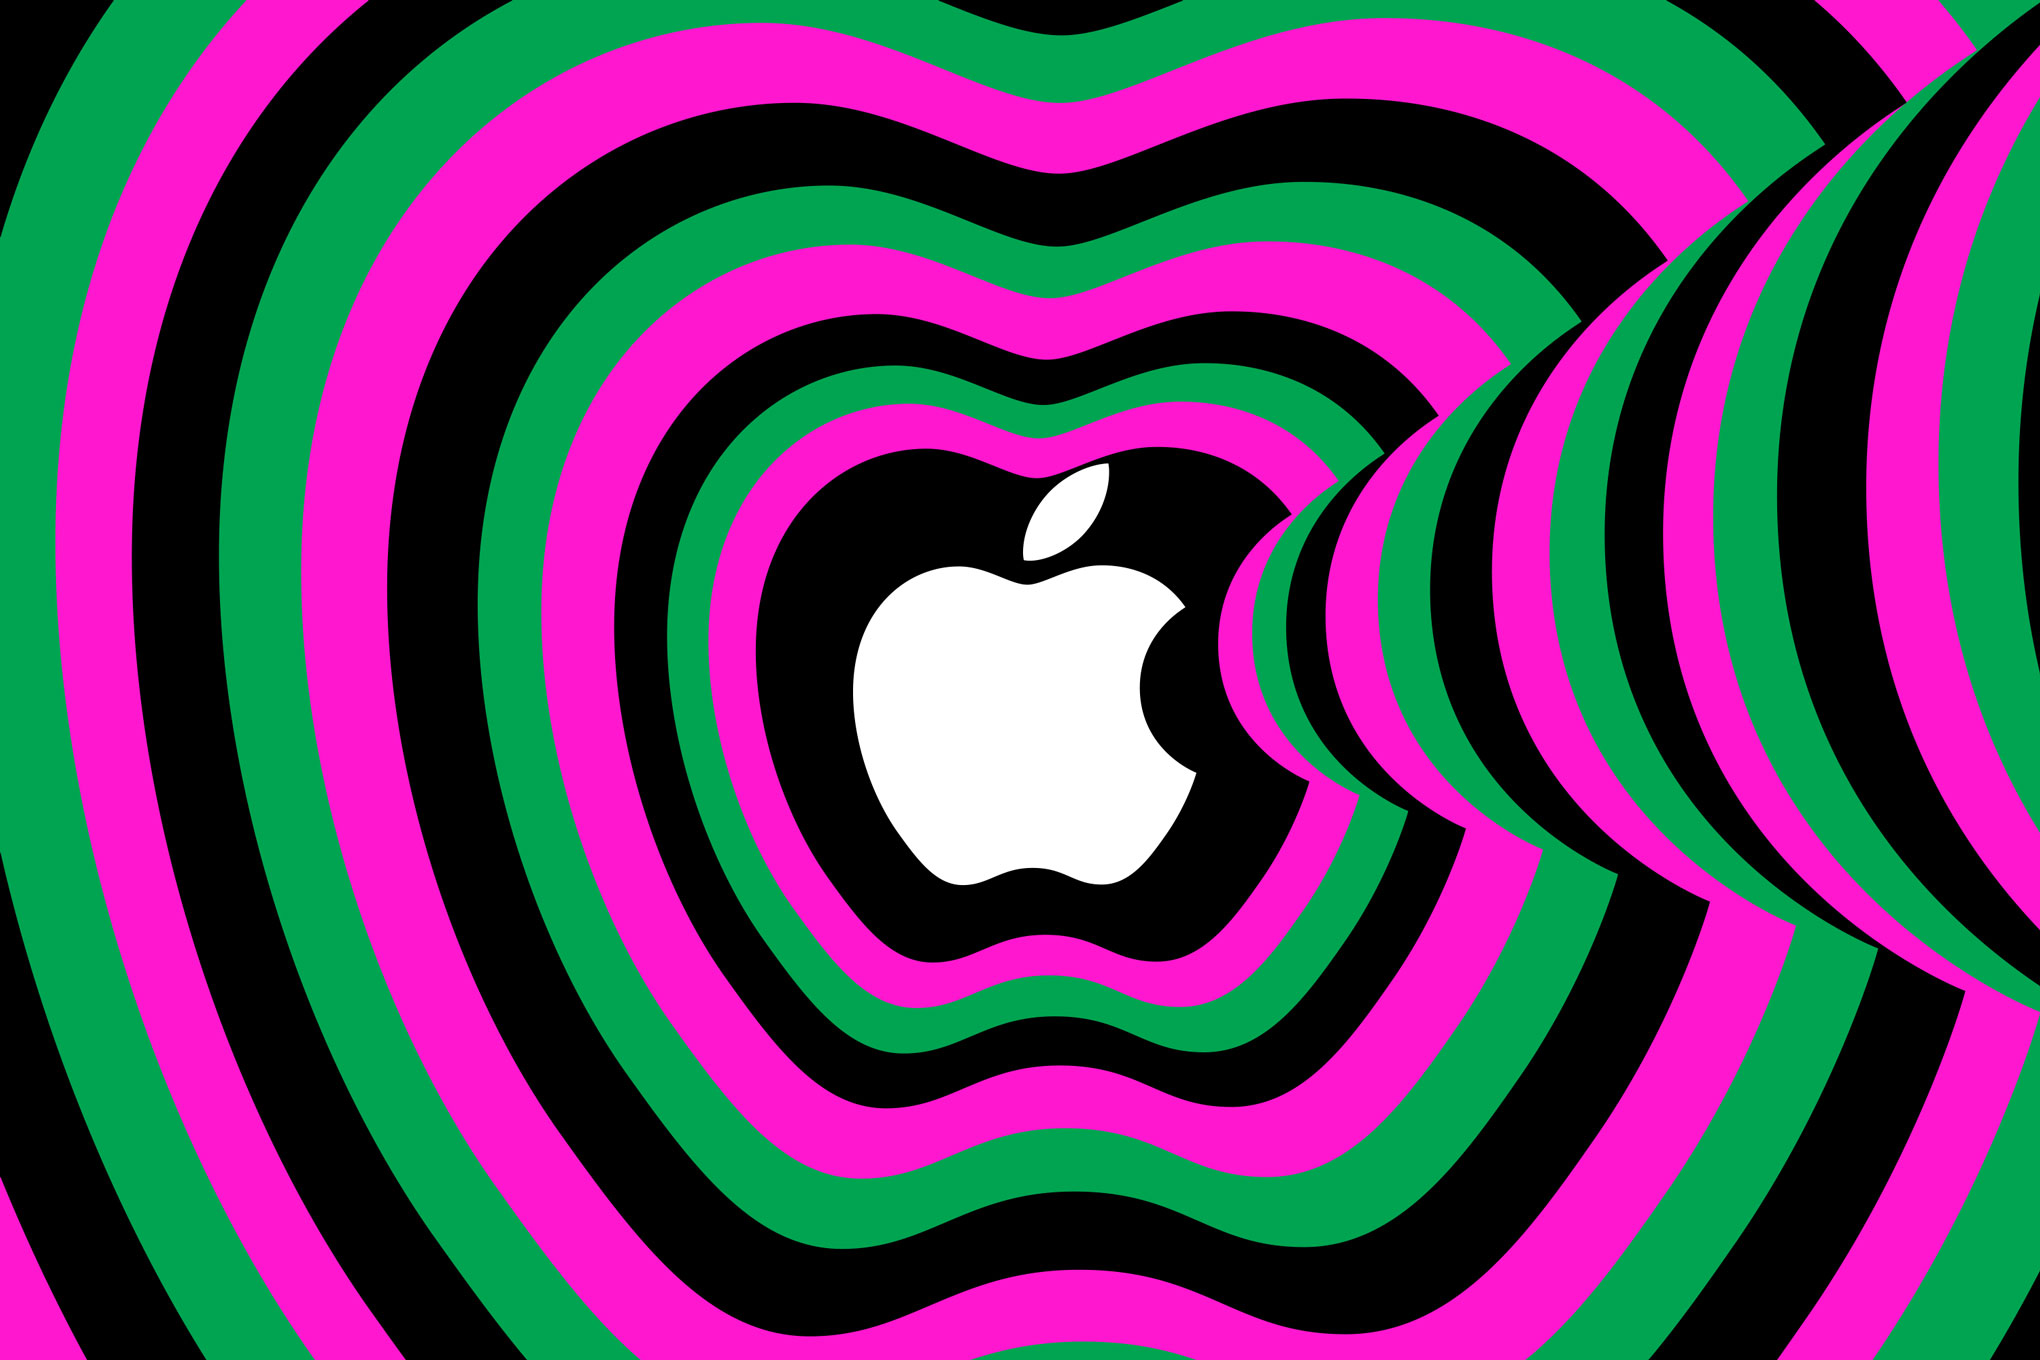 Image of the Apple logo surrounded by grey, pink, and green outlines